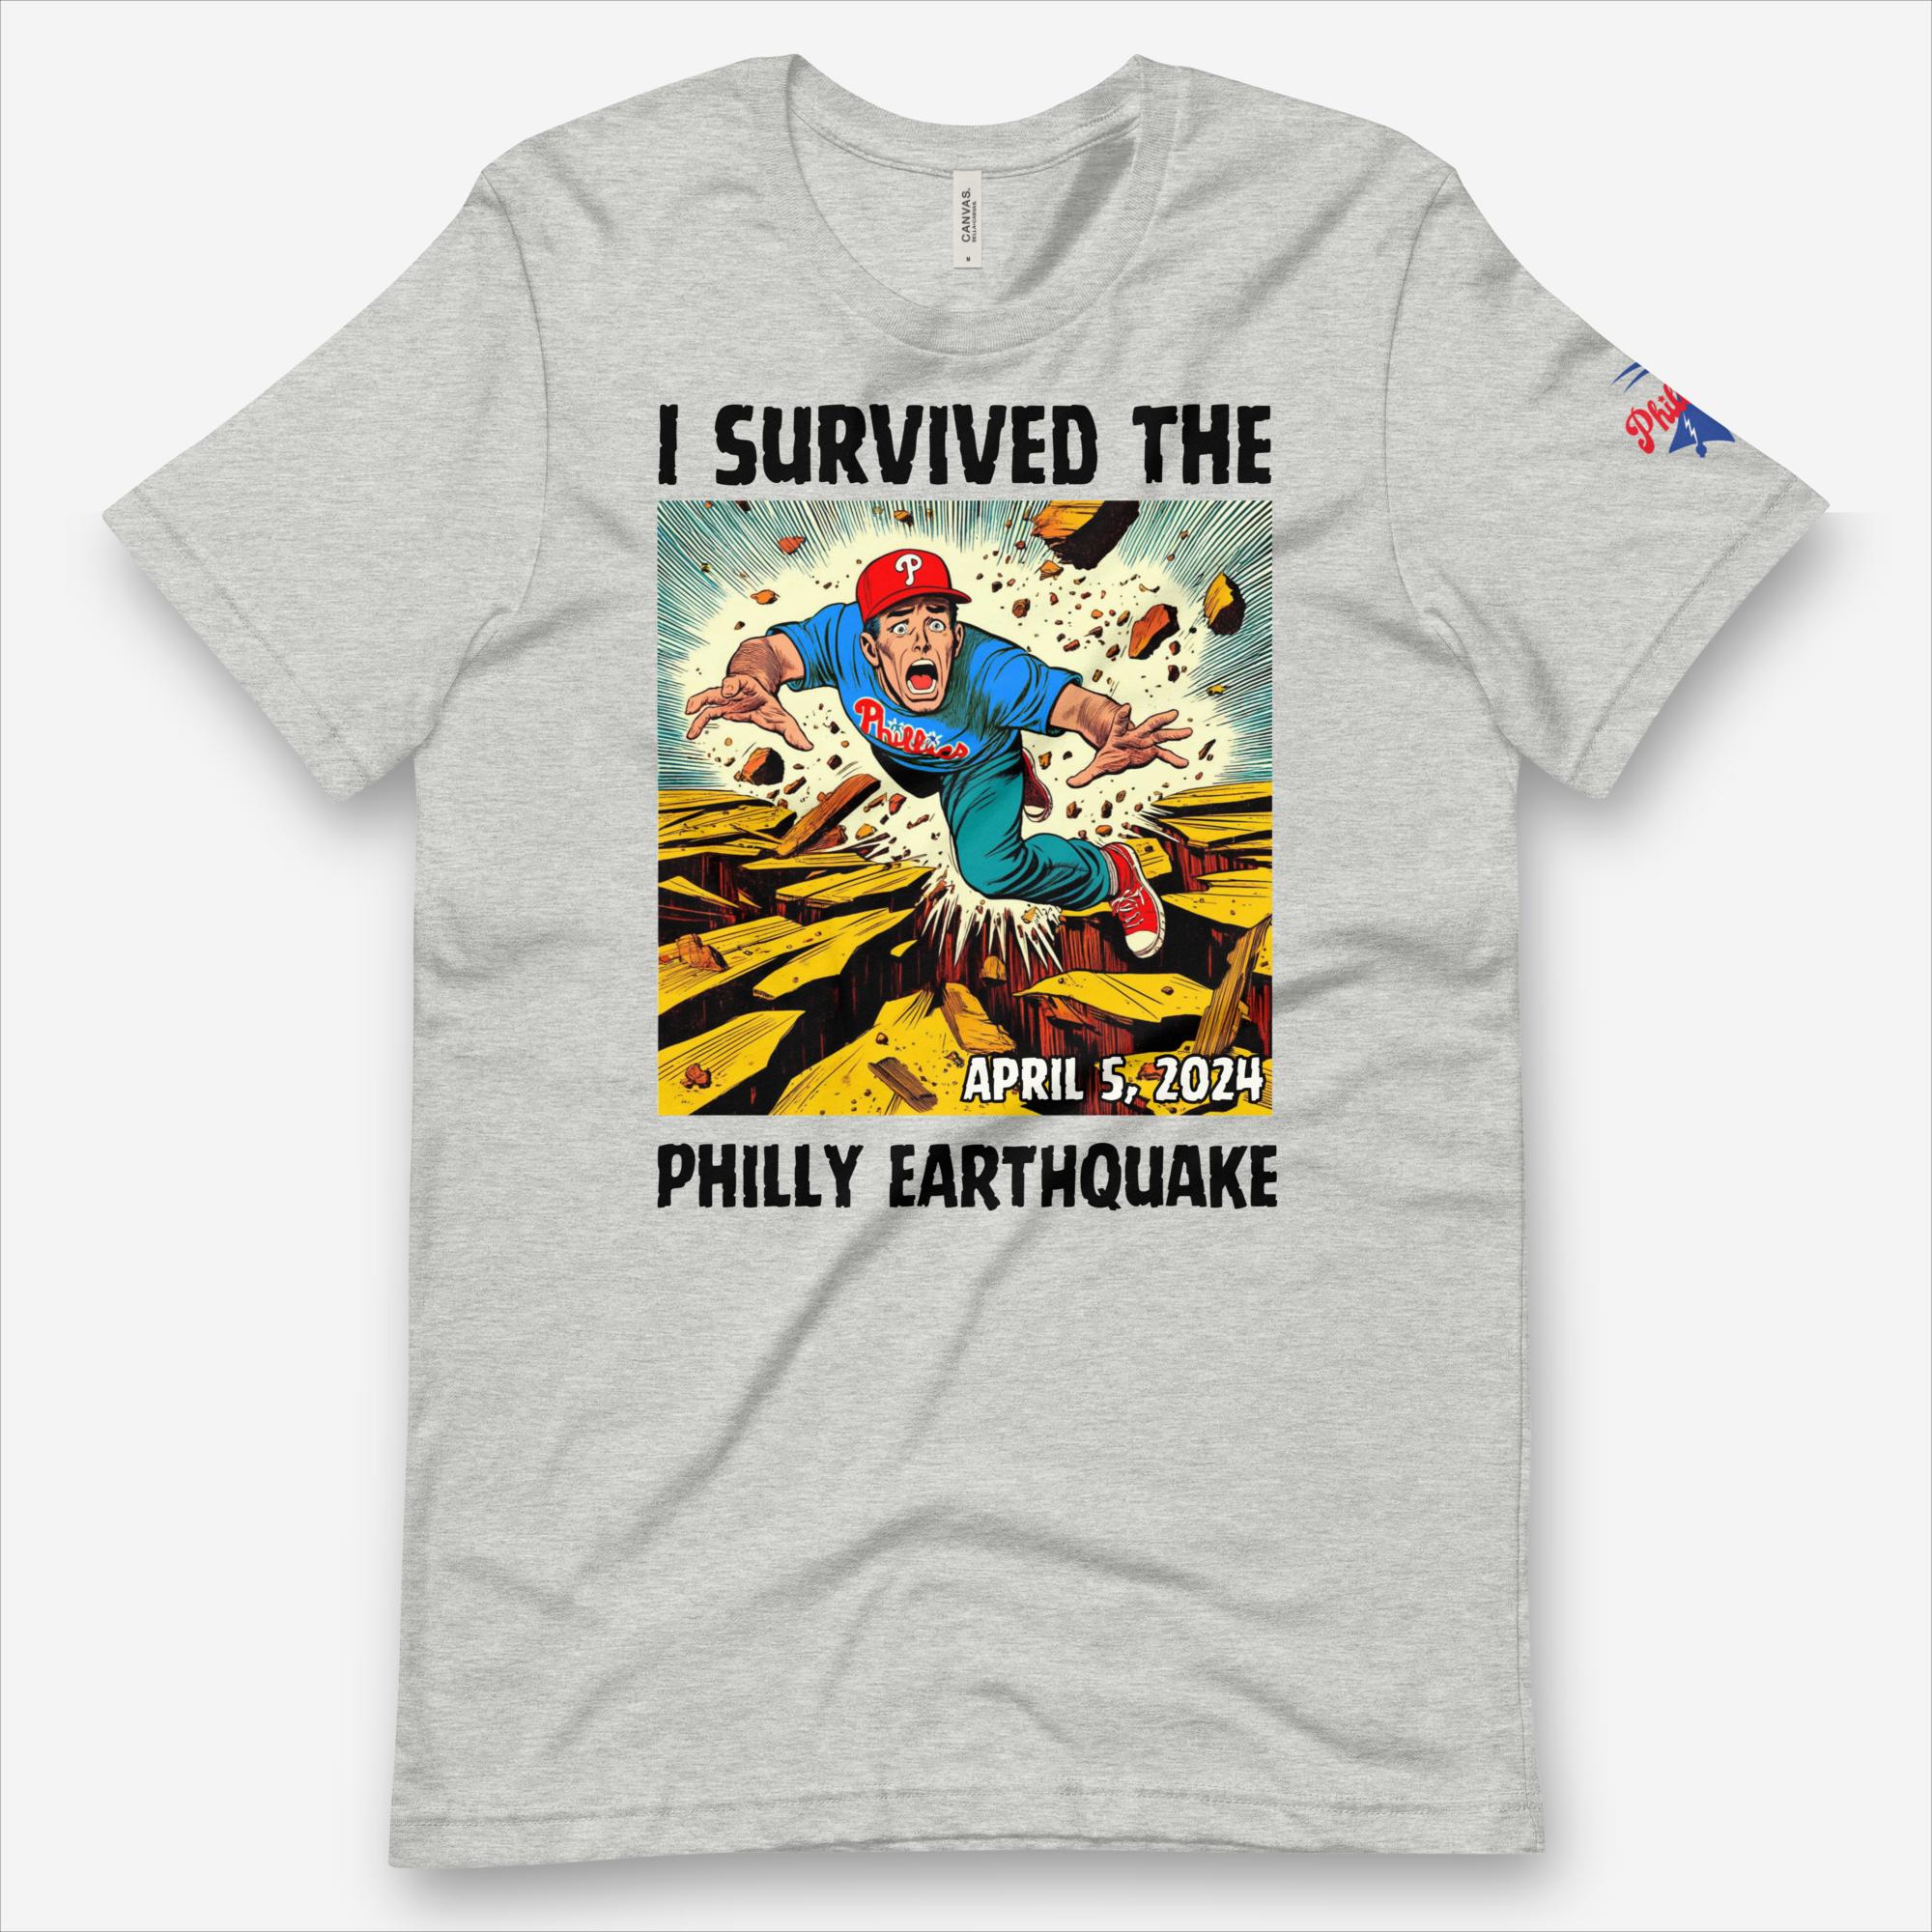 "I Survived the Philly Earthquake" Tee